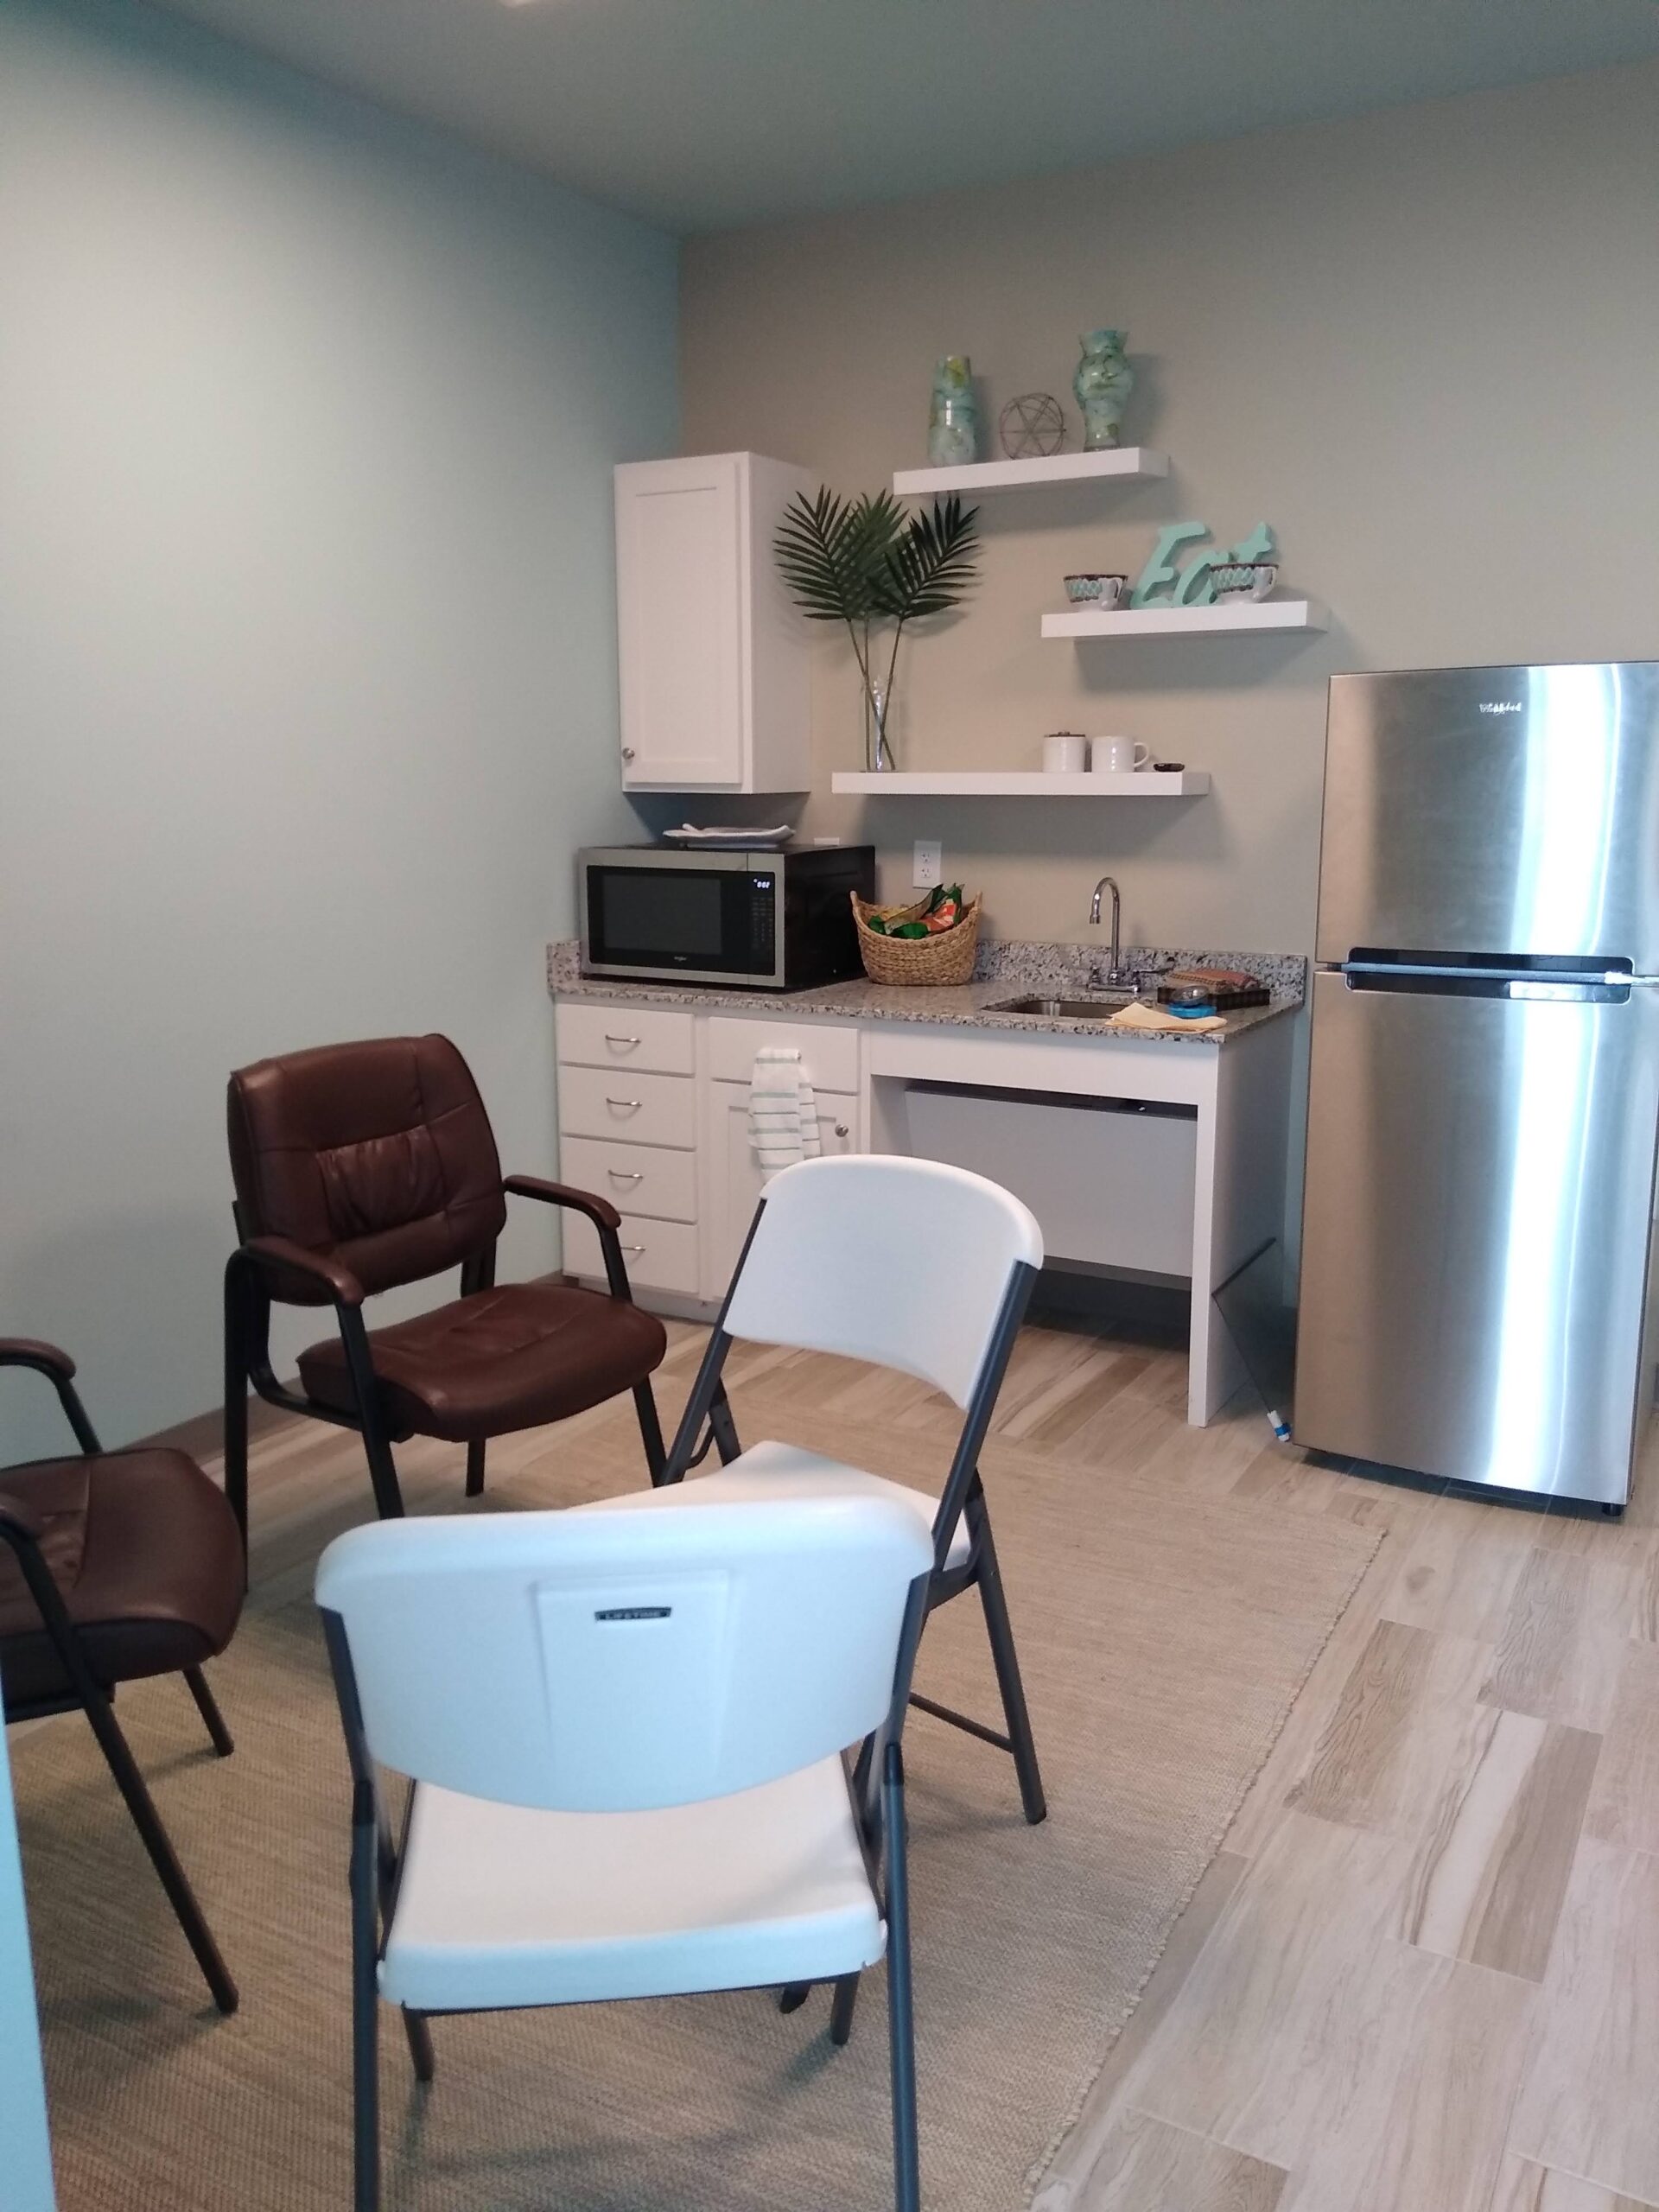 Kitchenette and sitting chairs